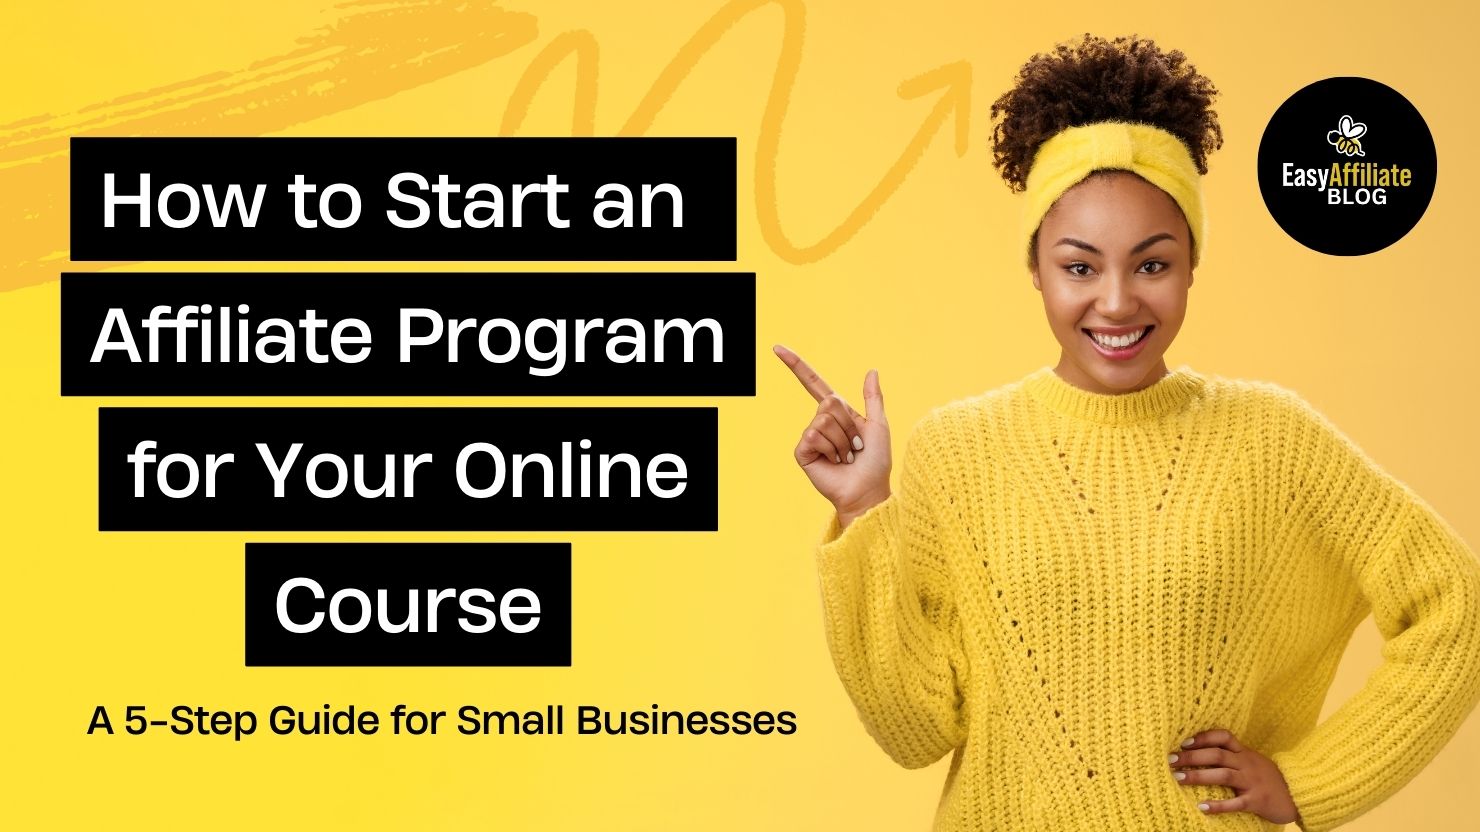 Affiliate Program Online Course for Small Business_Easy Affiliate